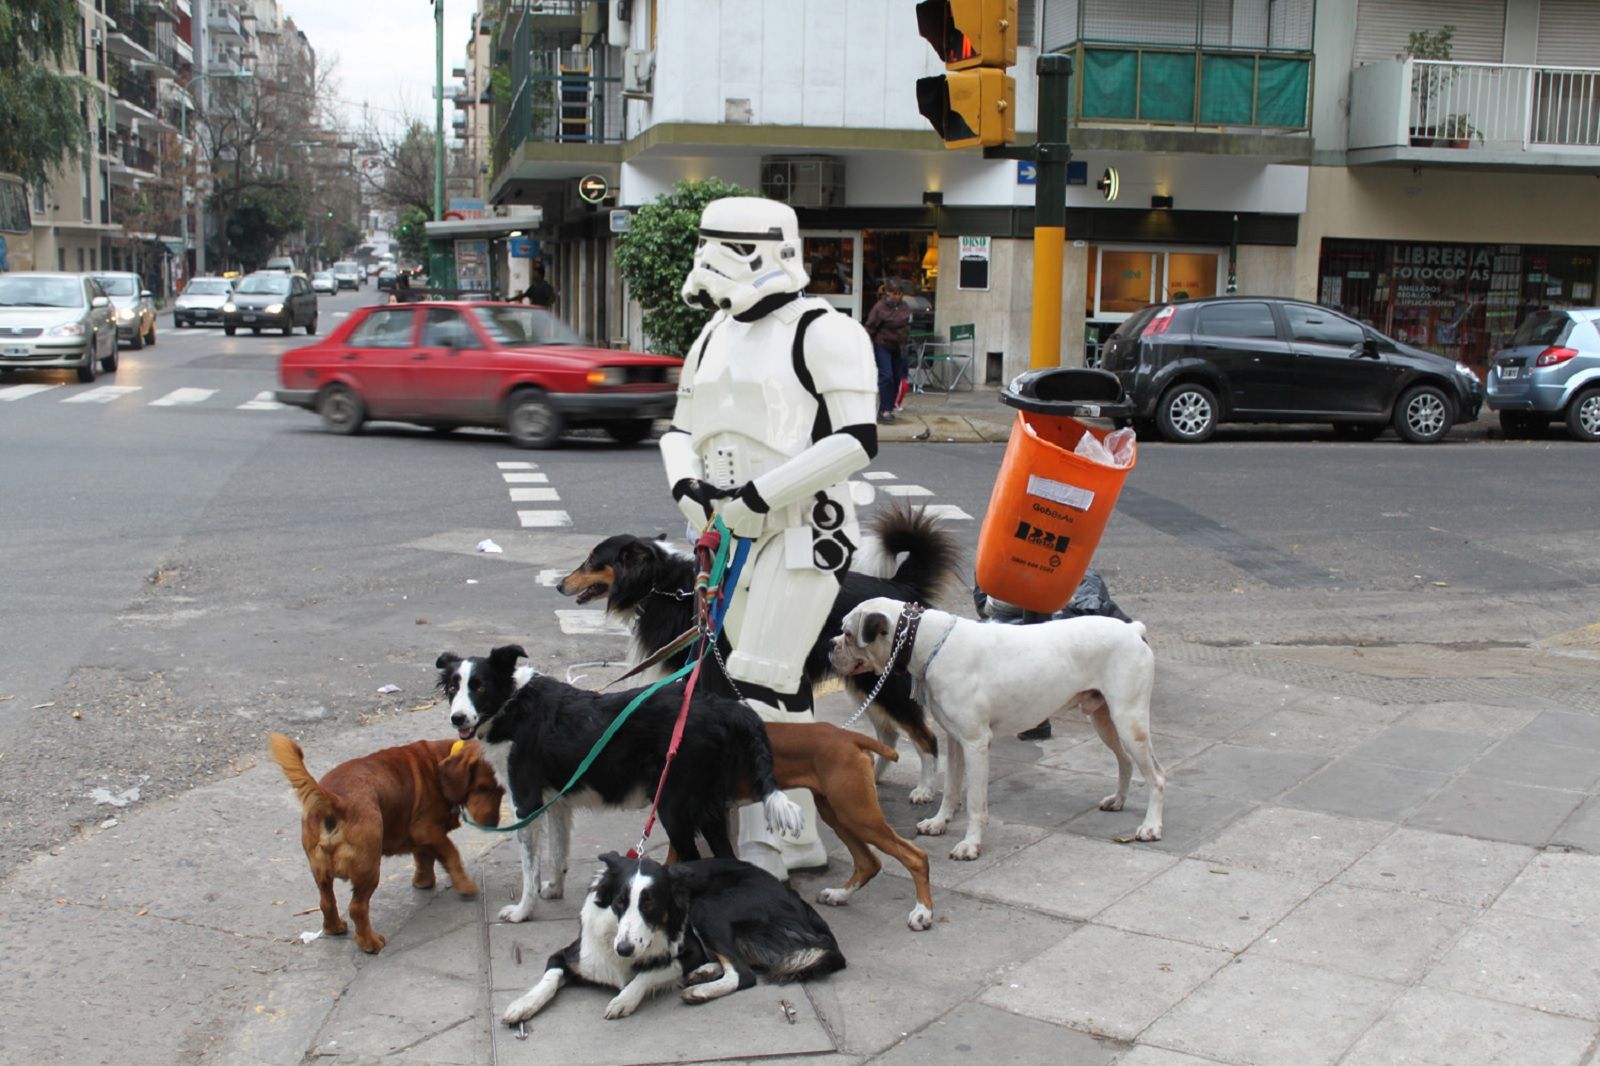 Star Wars characters in unexpected places photo 9